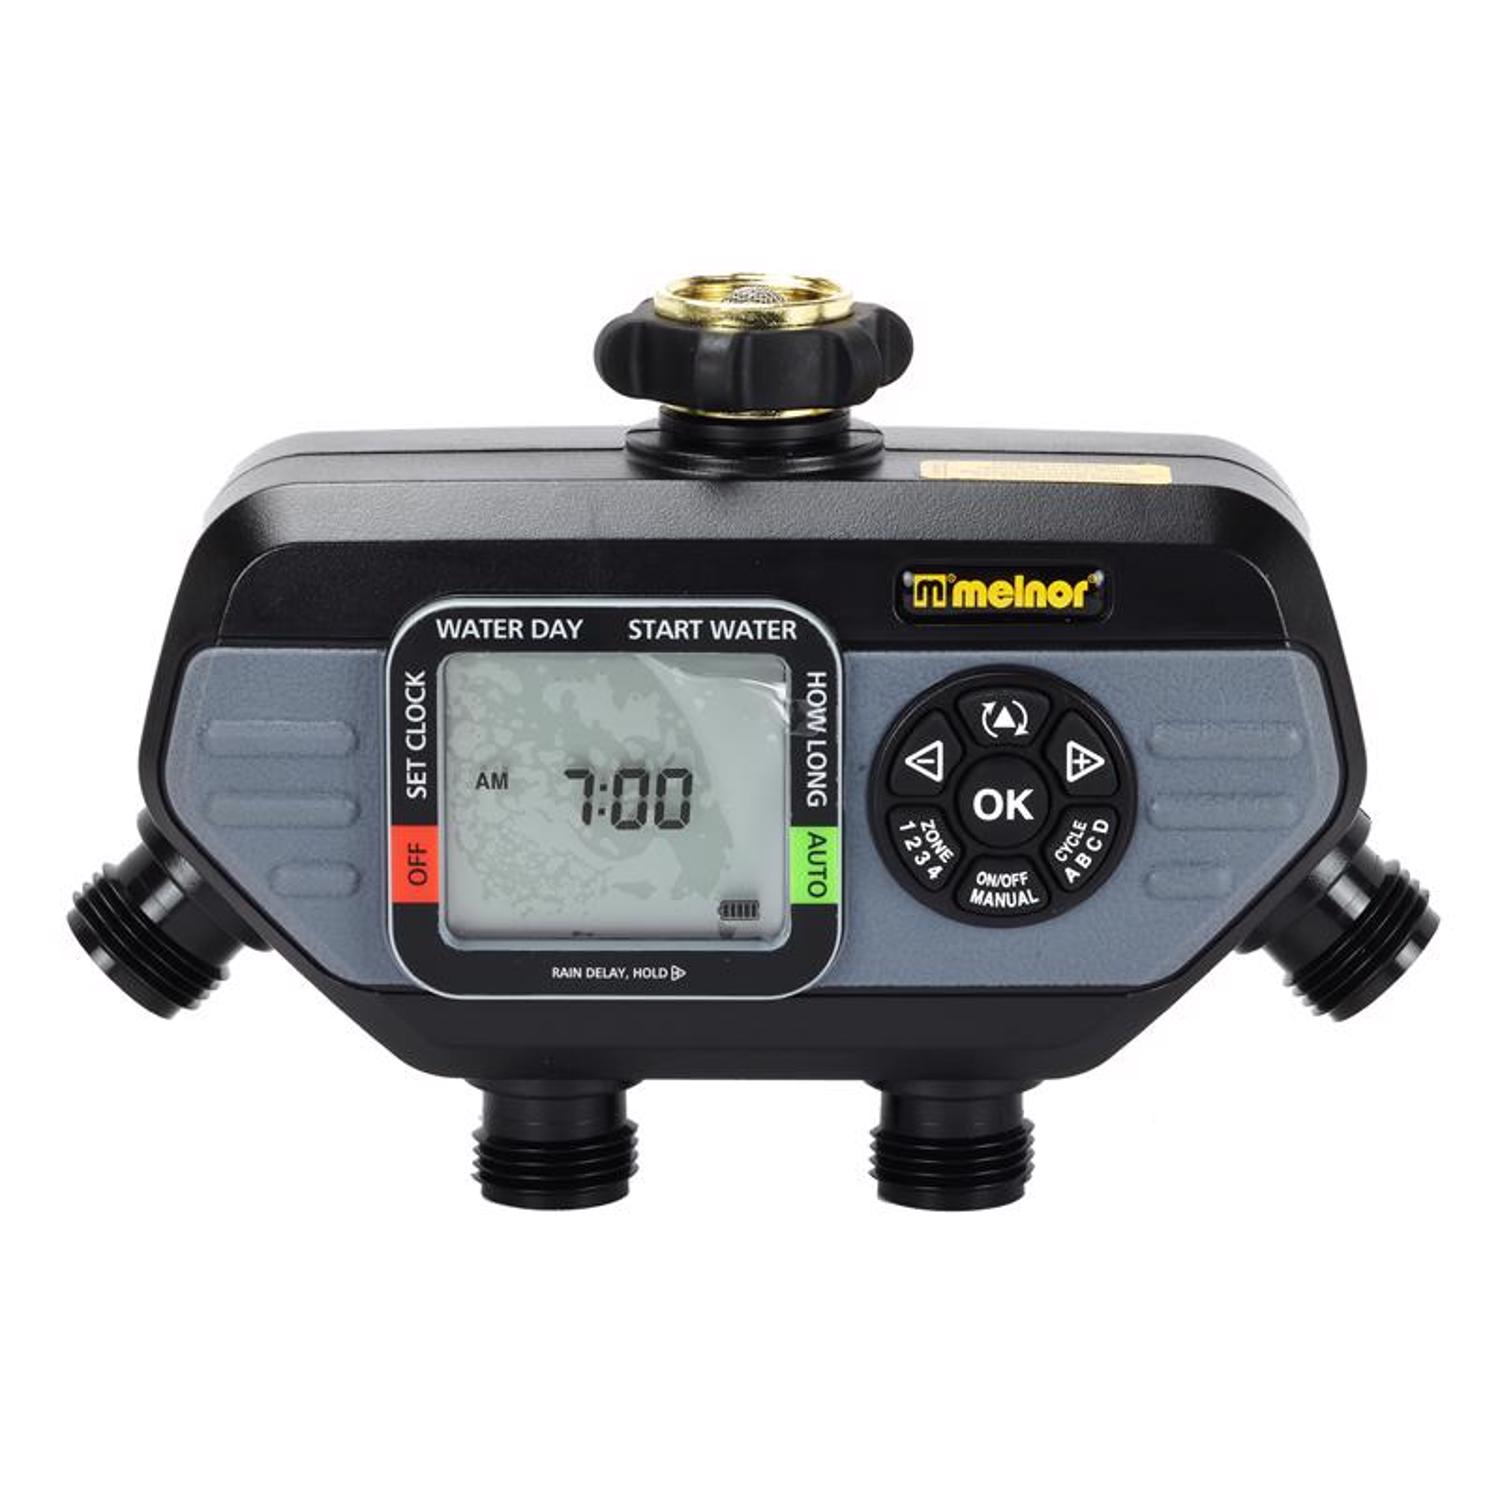 Photos - Other for Irrigation Melnor HydroLogic Programmable 4 Zone Digital Water Timer 73280